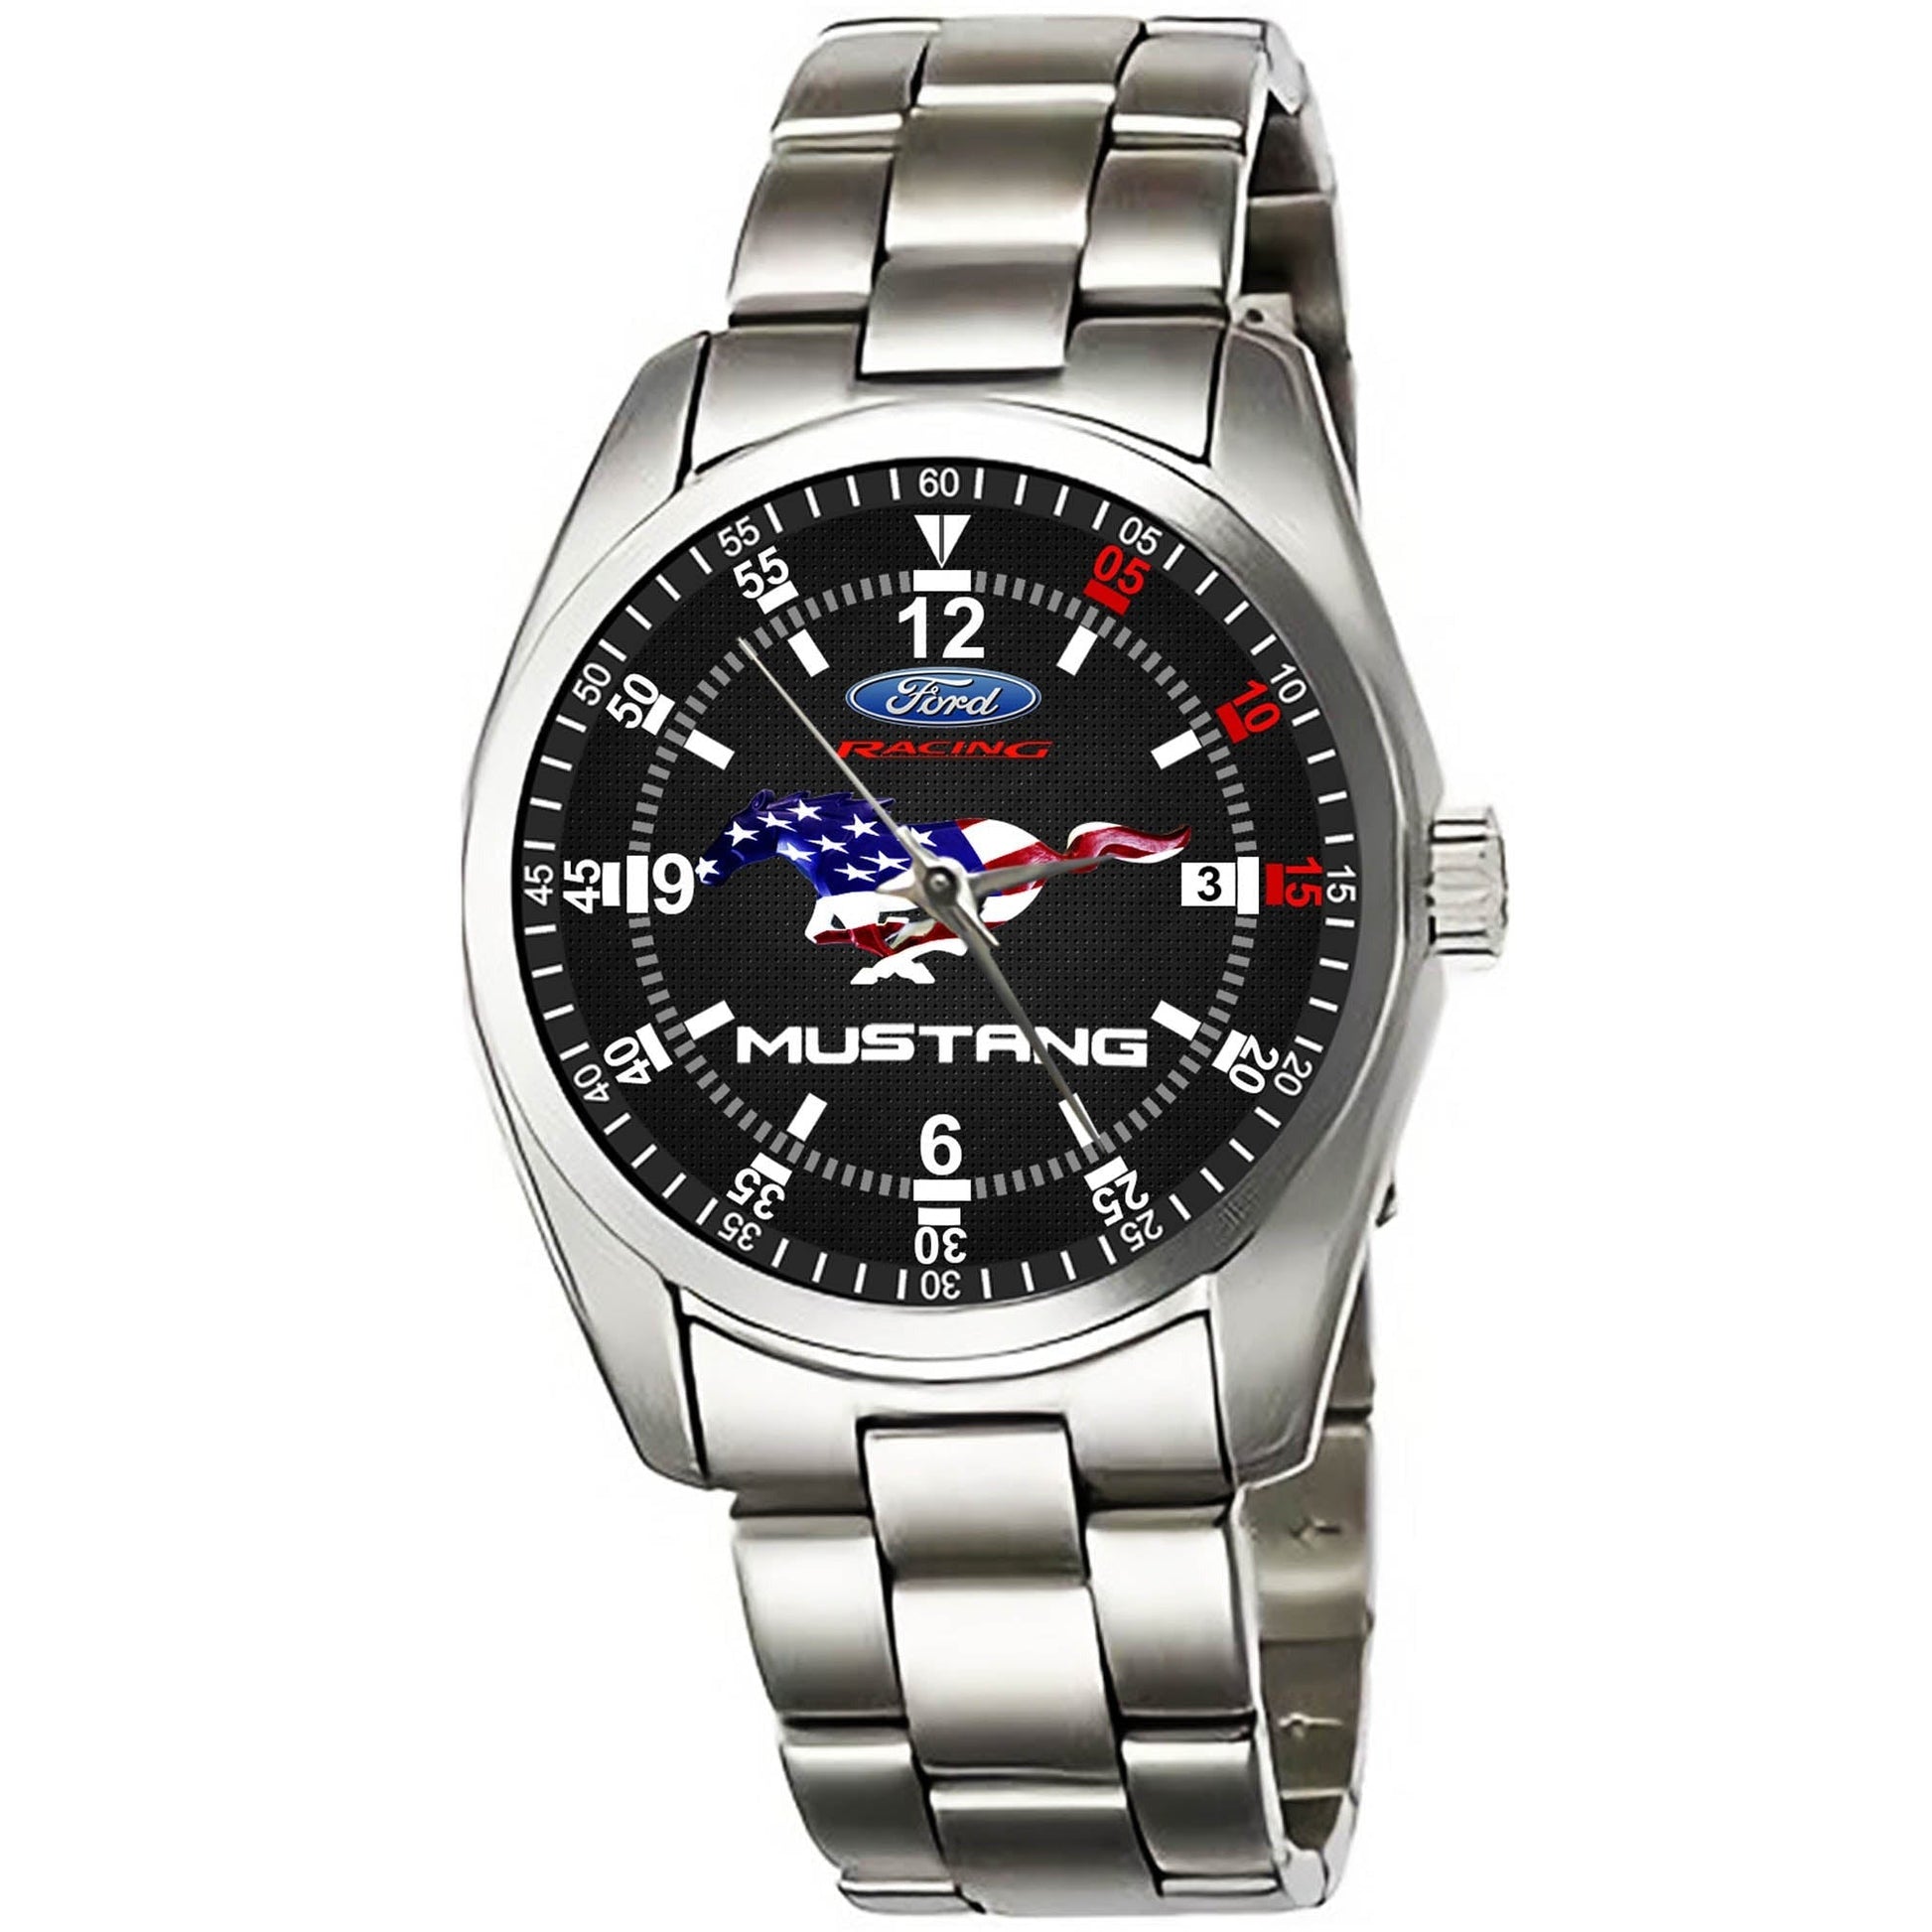 Ford Mustang Racing Watches KP77